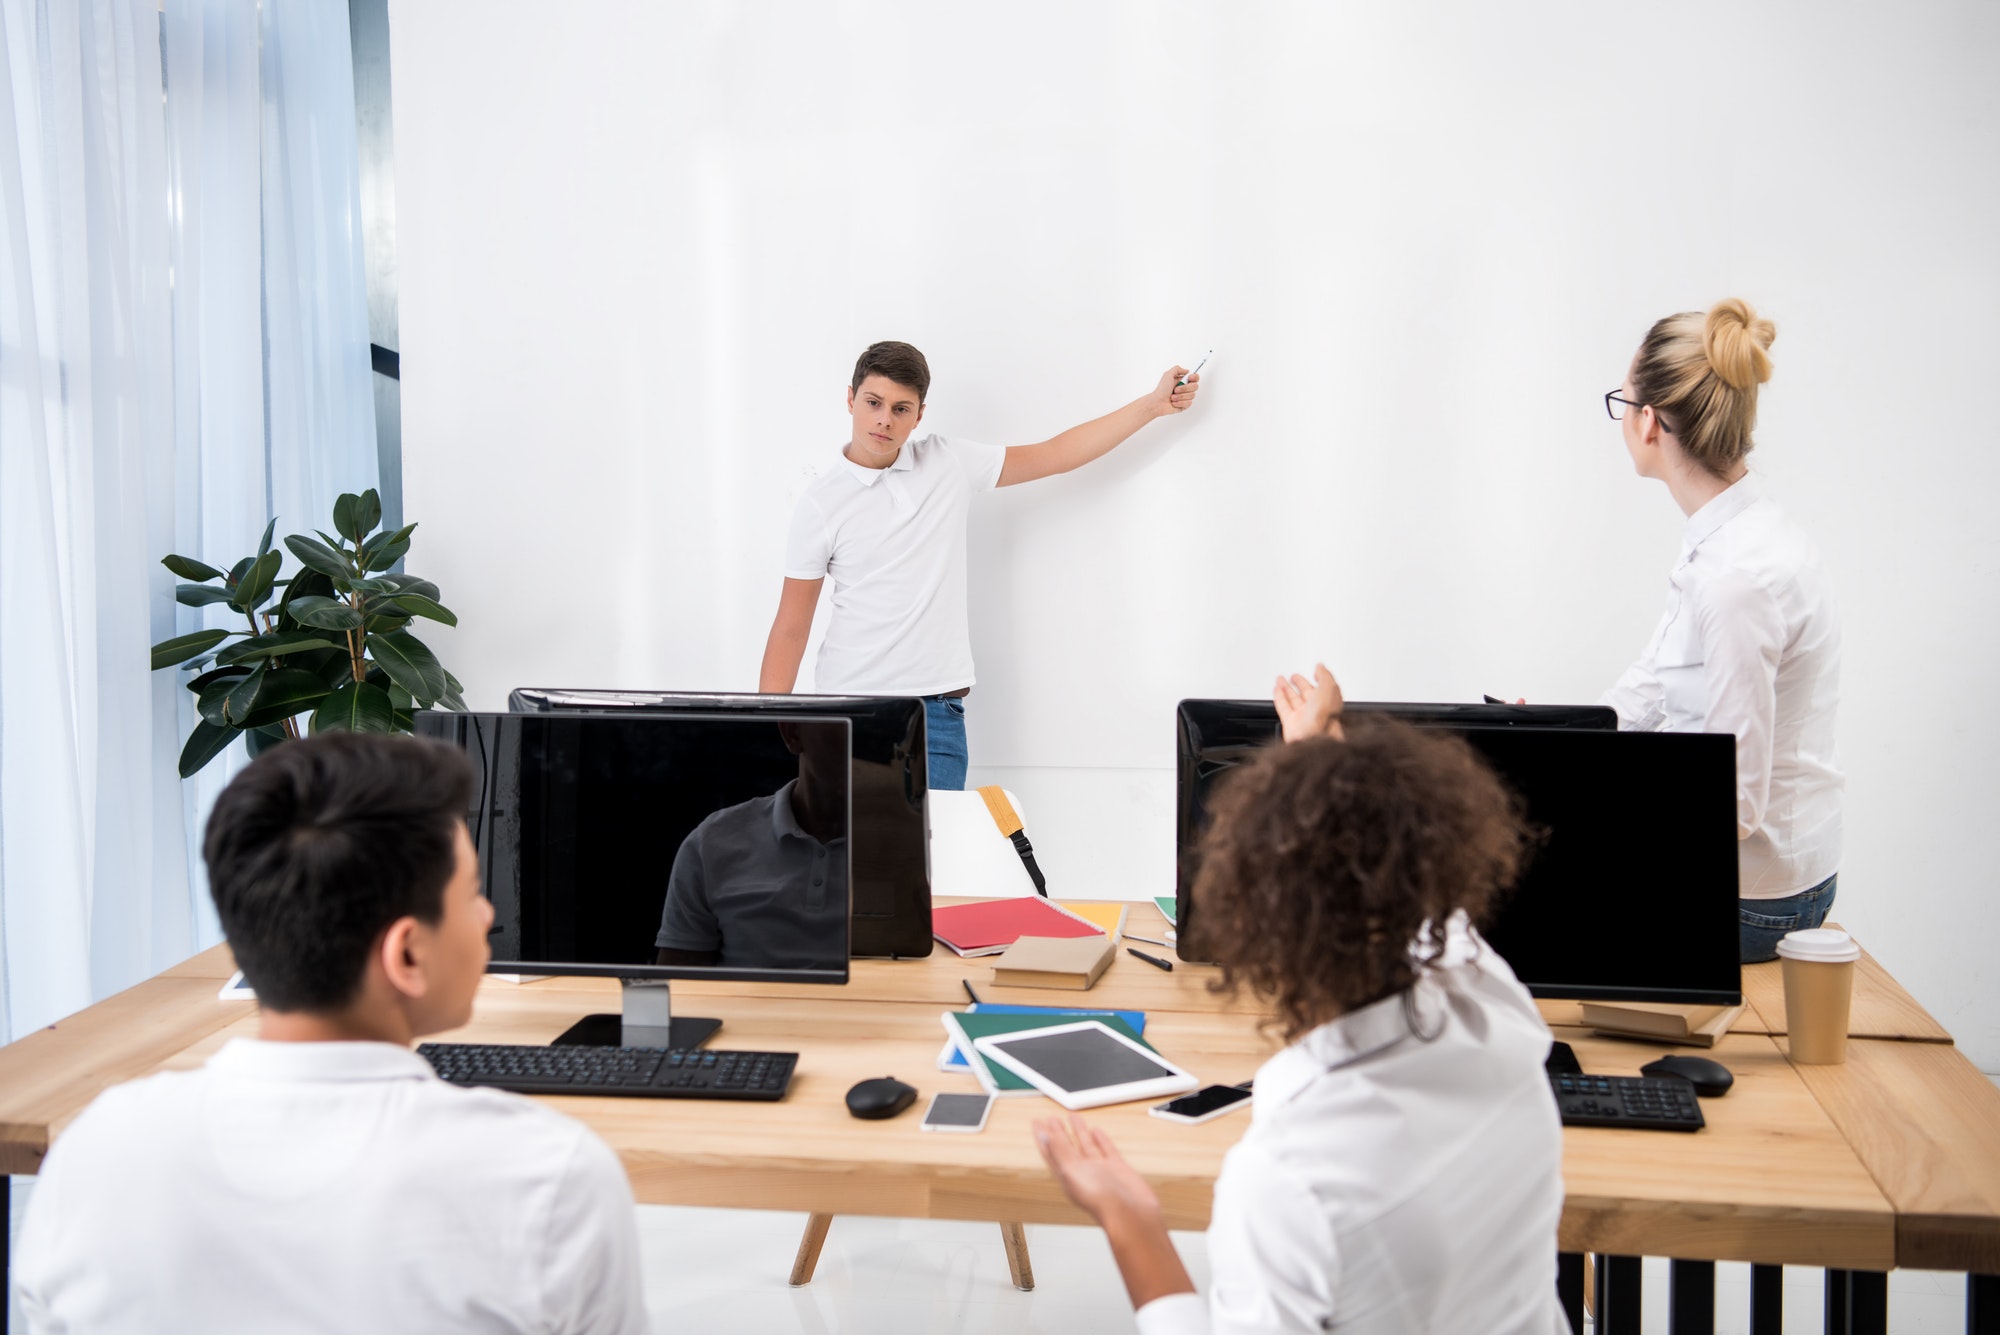 young teenager pointing on white board in classroom with students